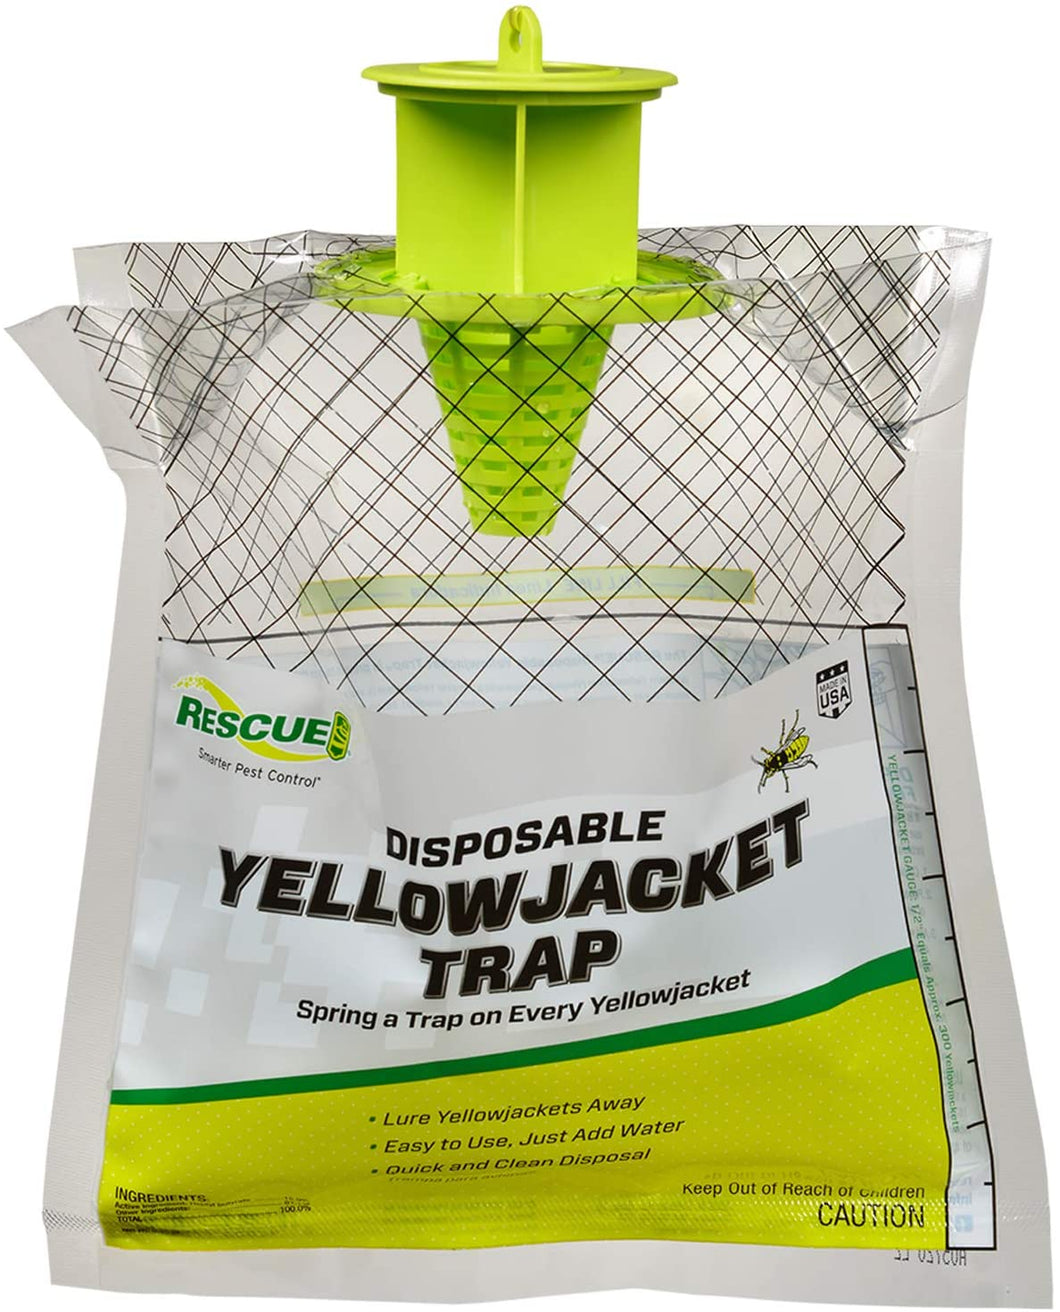 CHS Rescue Yellowjacket Disposable Trap (West), contains a special attractant for yellowjackets EAST OF THE ROCKY MOUNTAINS, add water to activate attractant